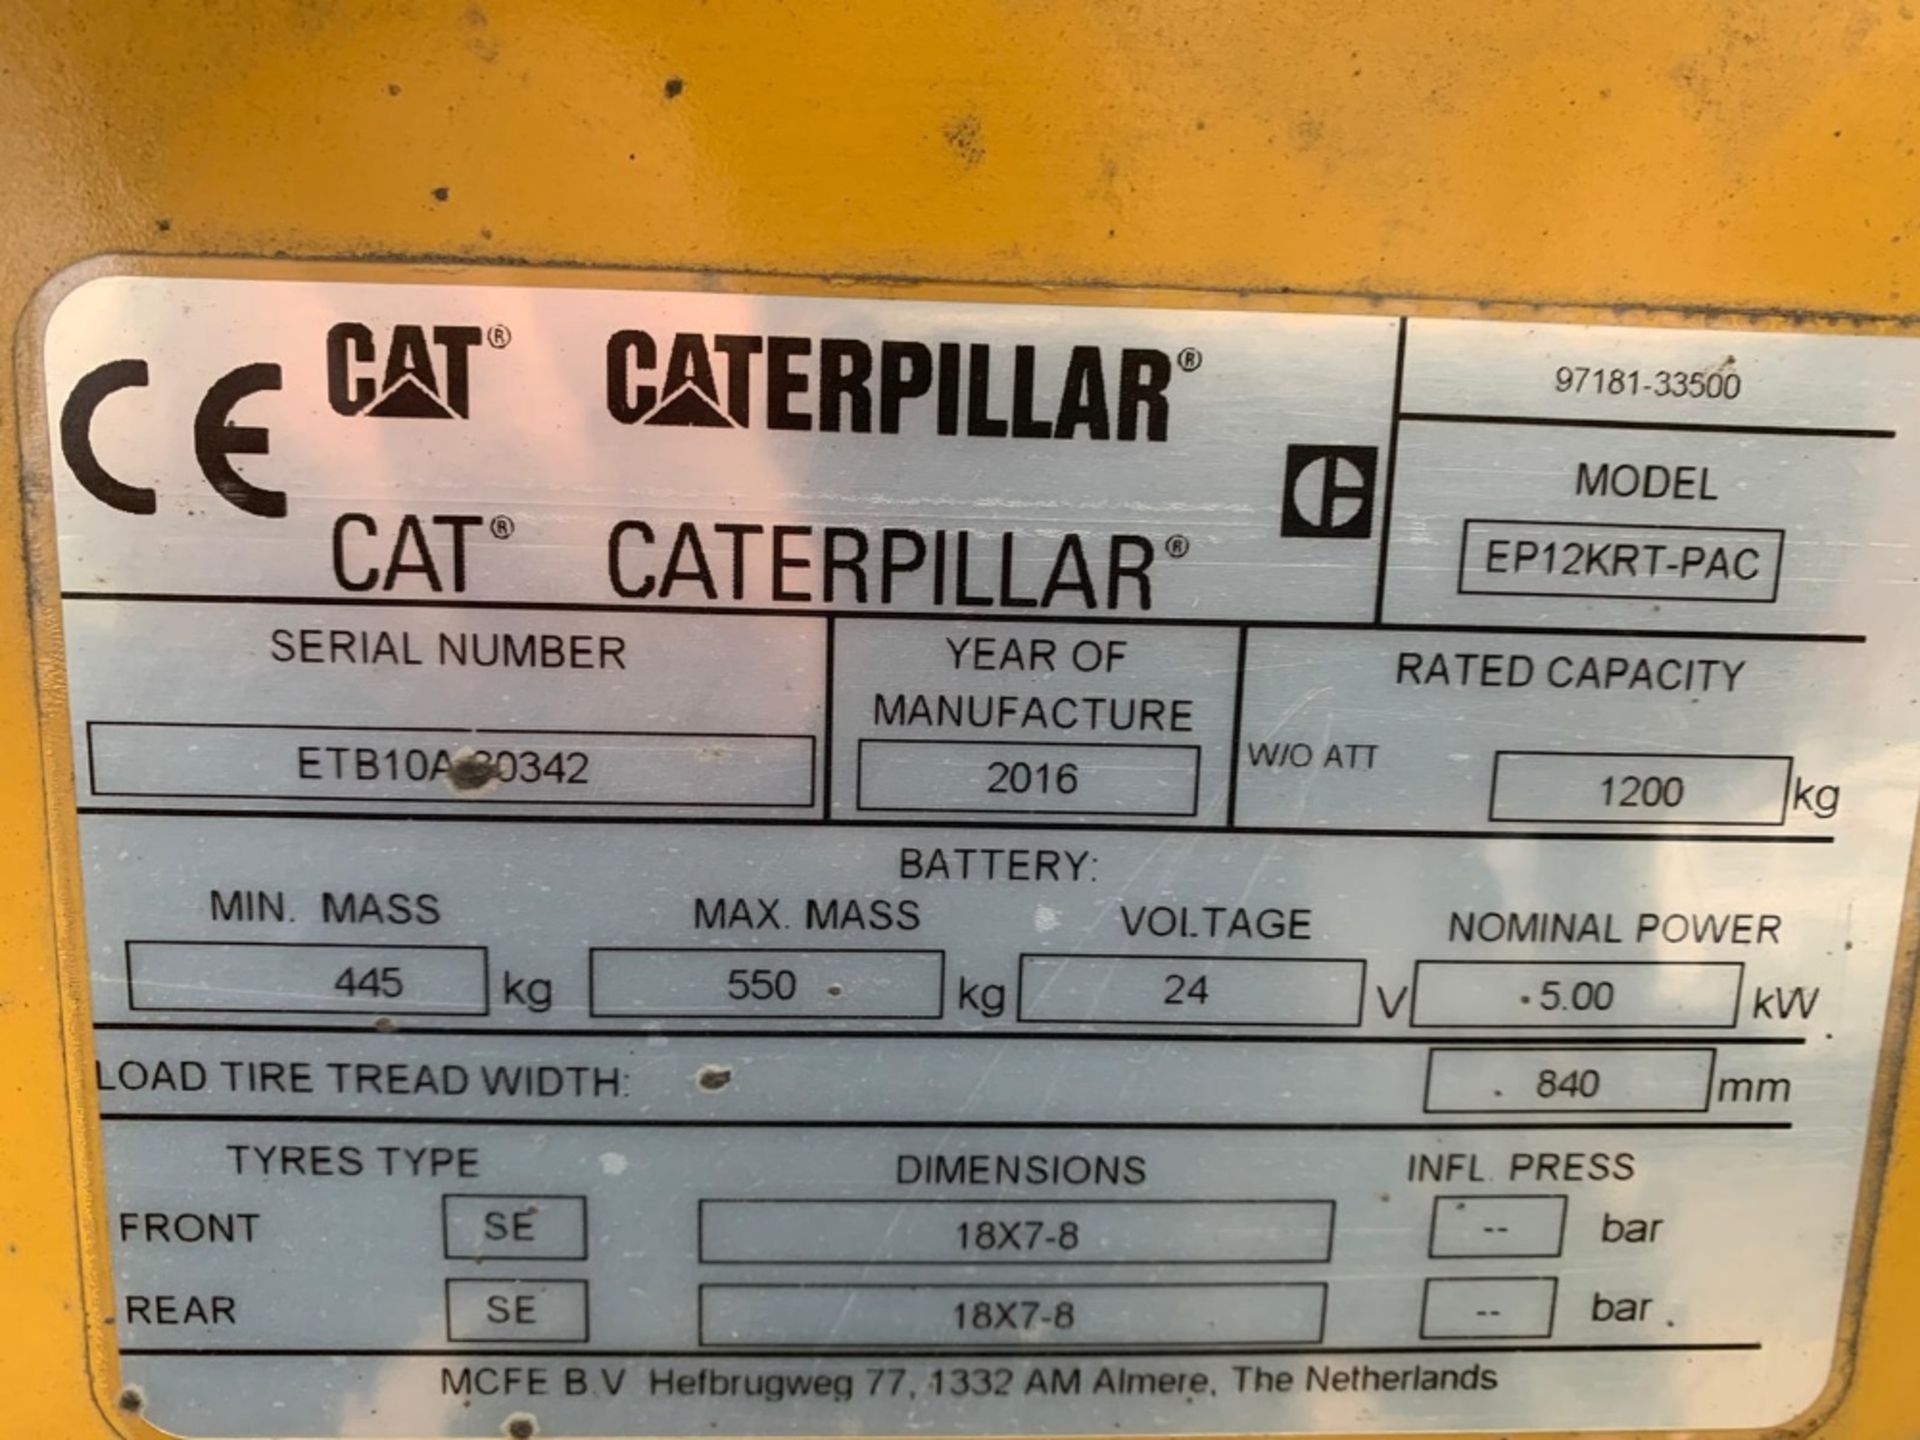 CATERPILLAR EP12KRT-PAC BATTERY FORKLIFT TRUCK, YEAR 2016 BUILD. 1.2 TONNE RATED. WHEN TESTED WAS S - Image 7 of 17